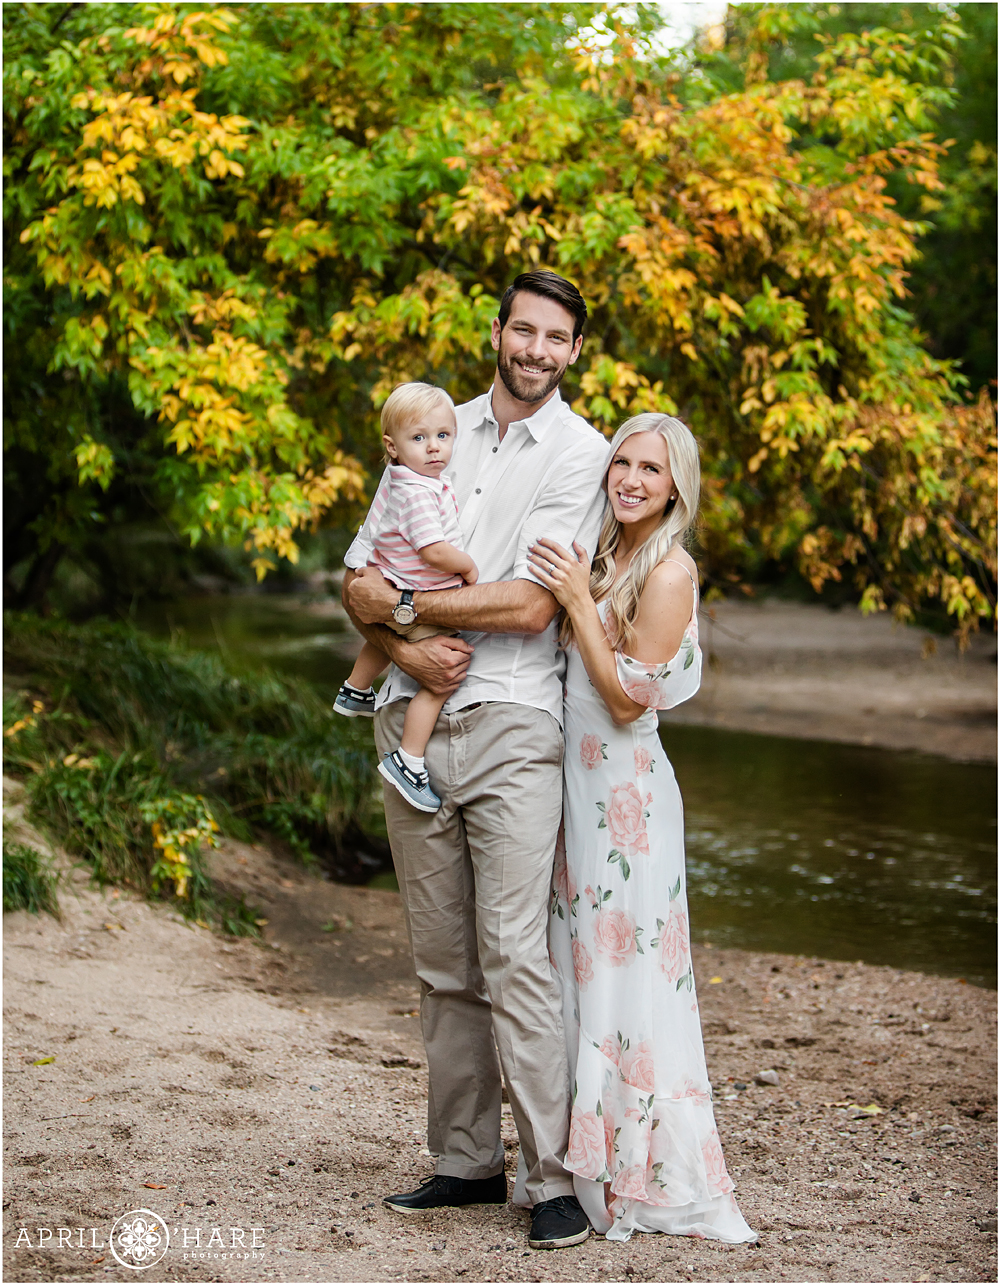 Beautiful Fall Color Family Photography at Cherry Creek Trail at Four Mile Historic Park